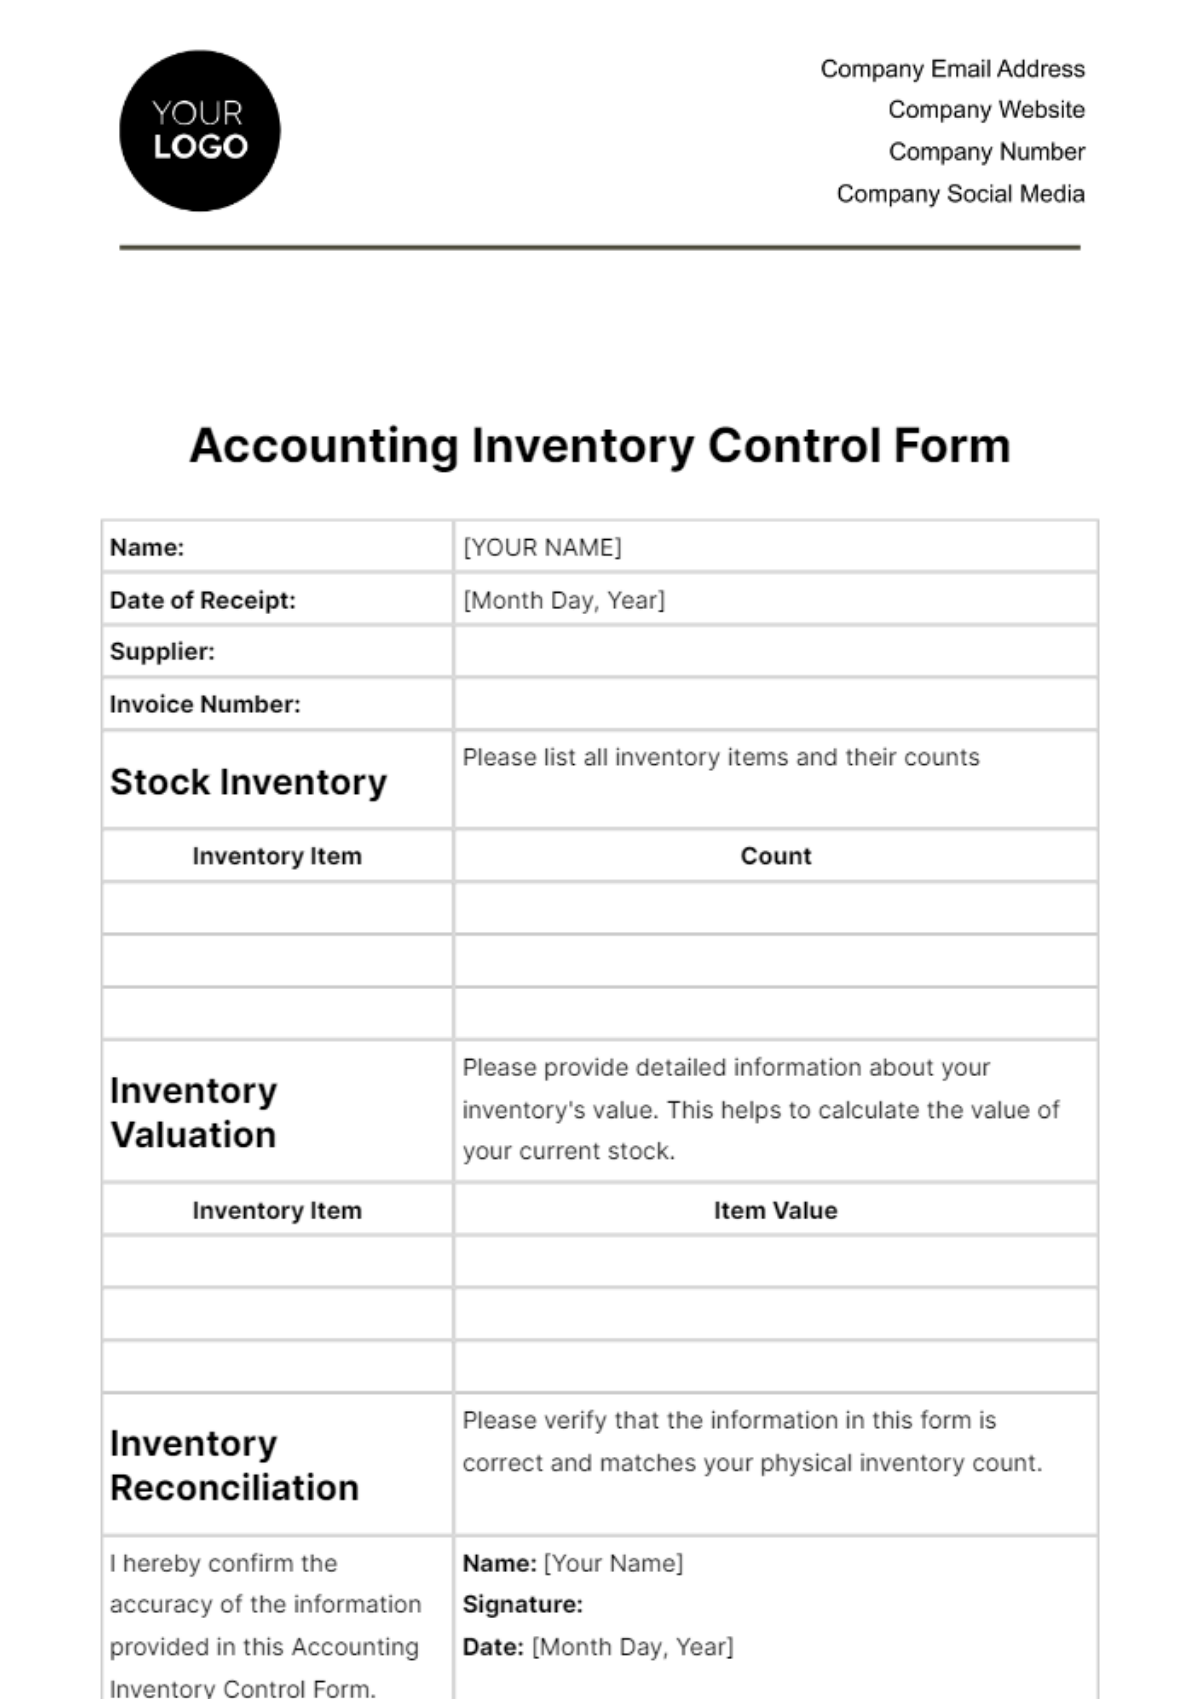 Free Accounting Inventory Control Form Template